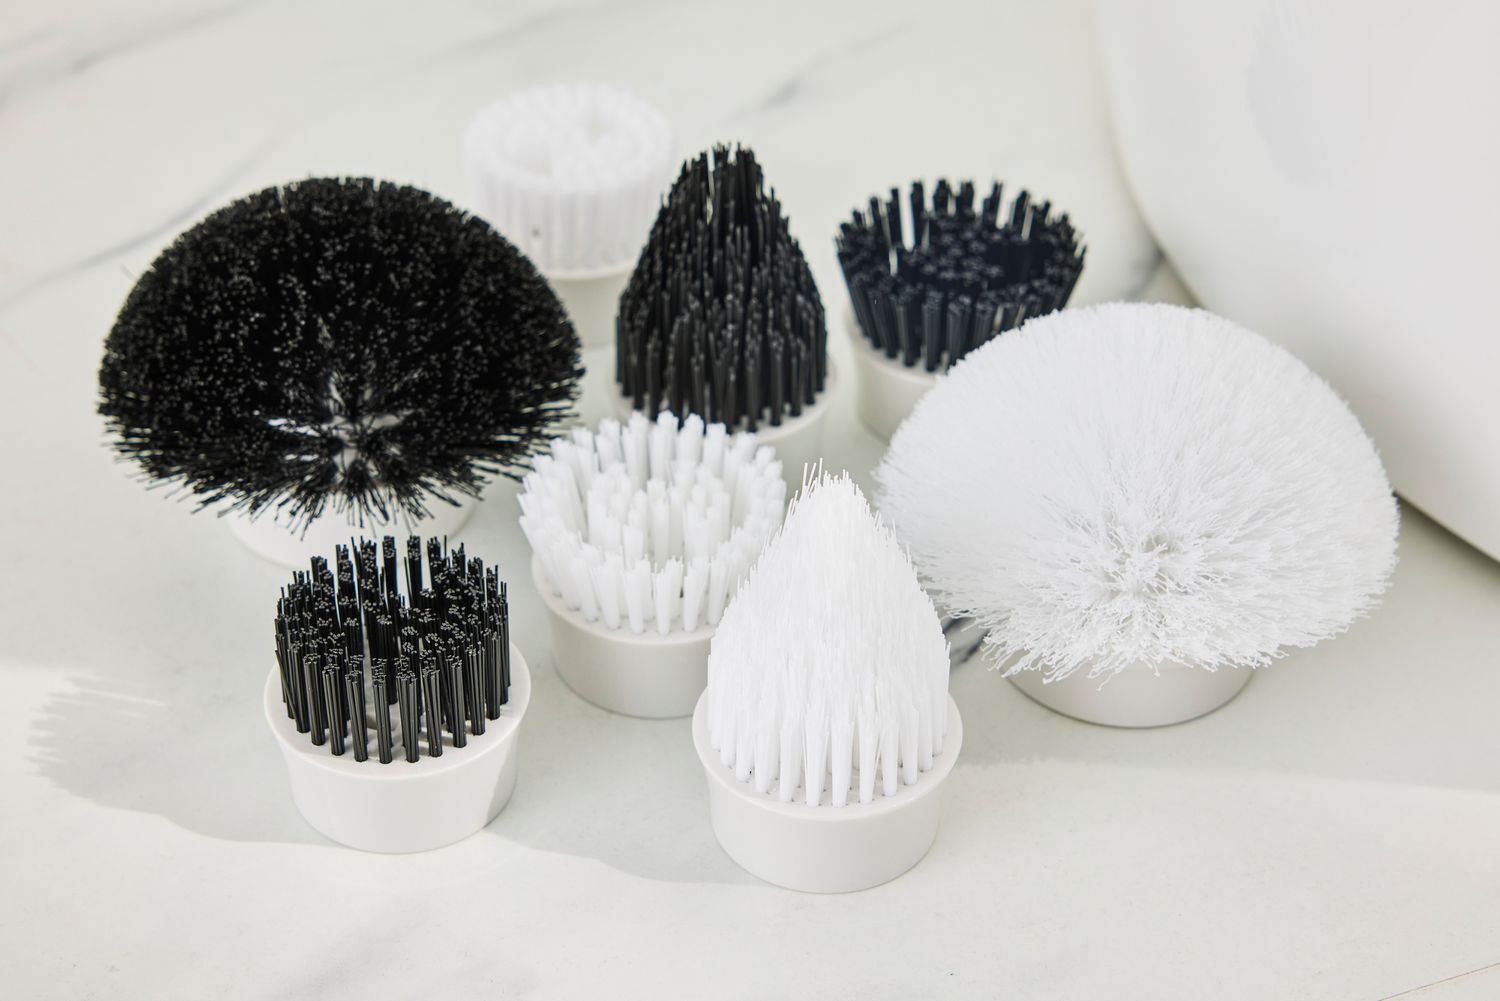 The various attachments for a Klever Electric Spin Scrubber with 8 Brushes on a white surface